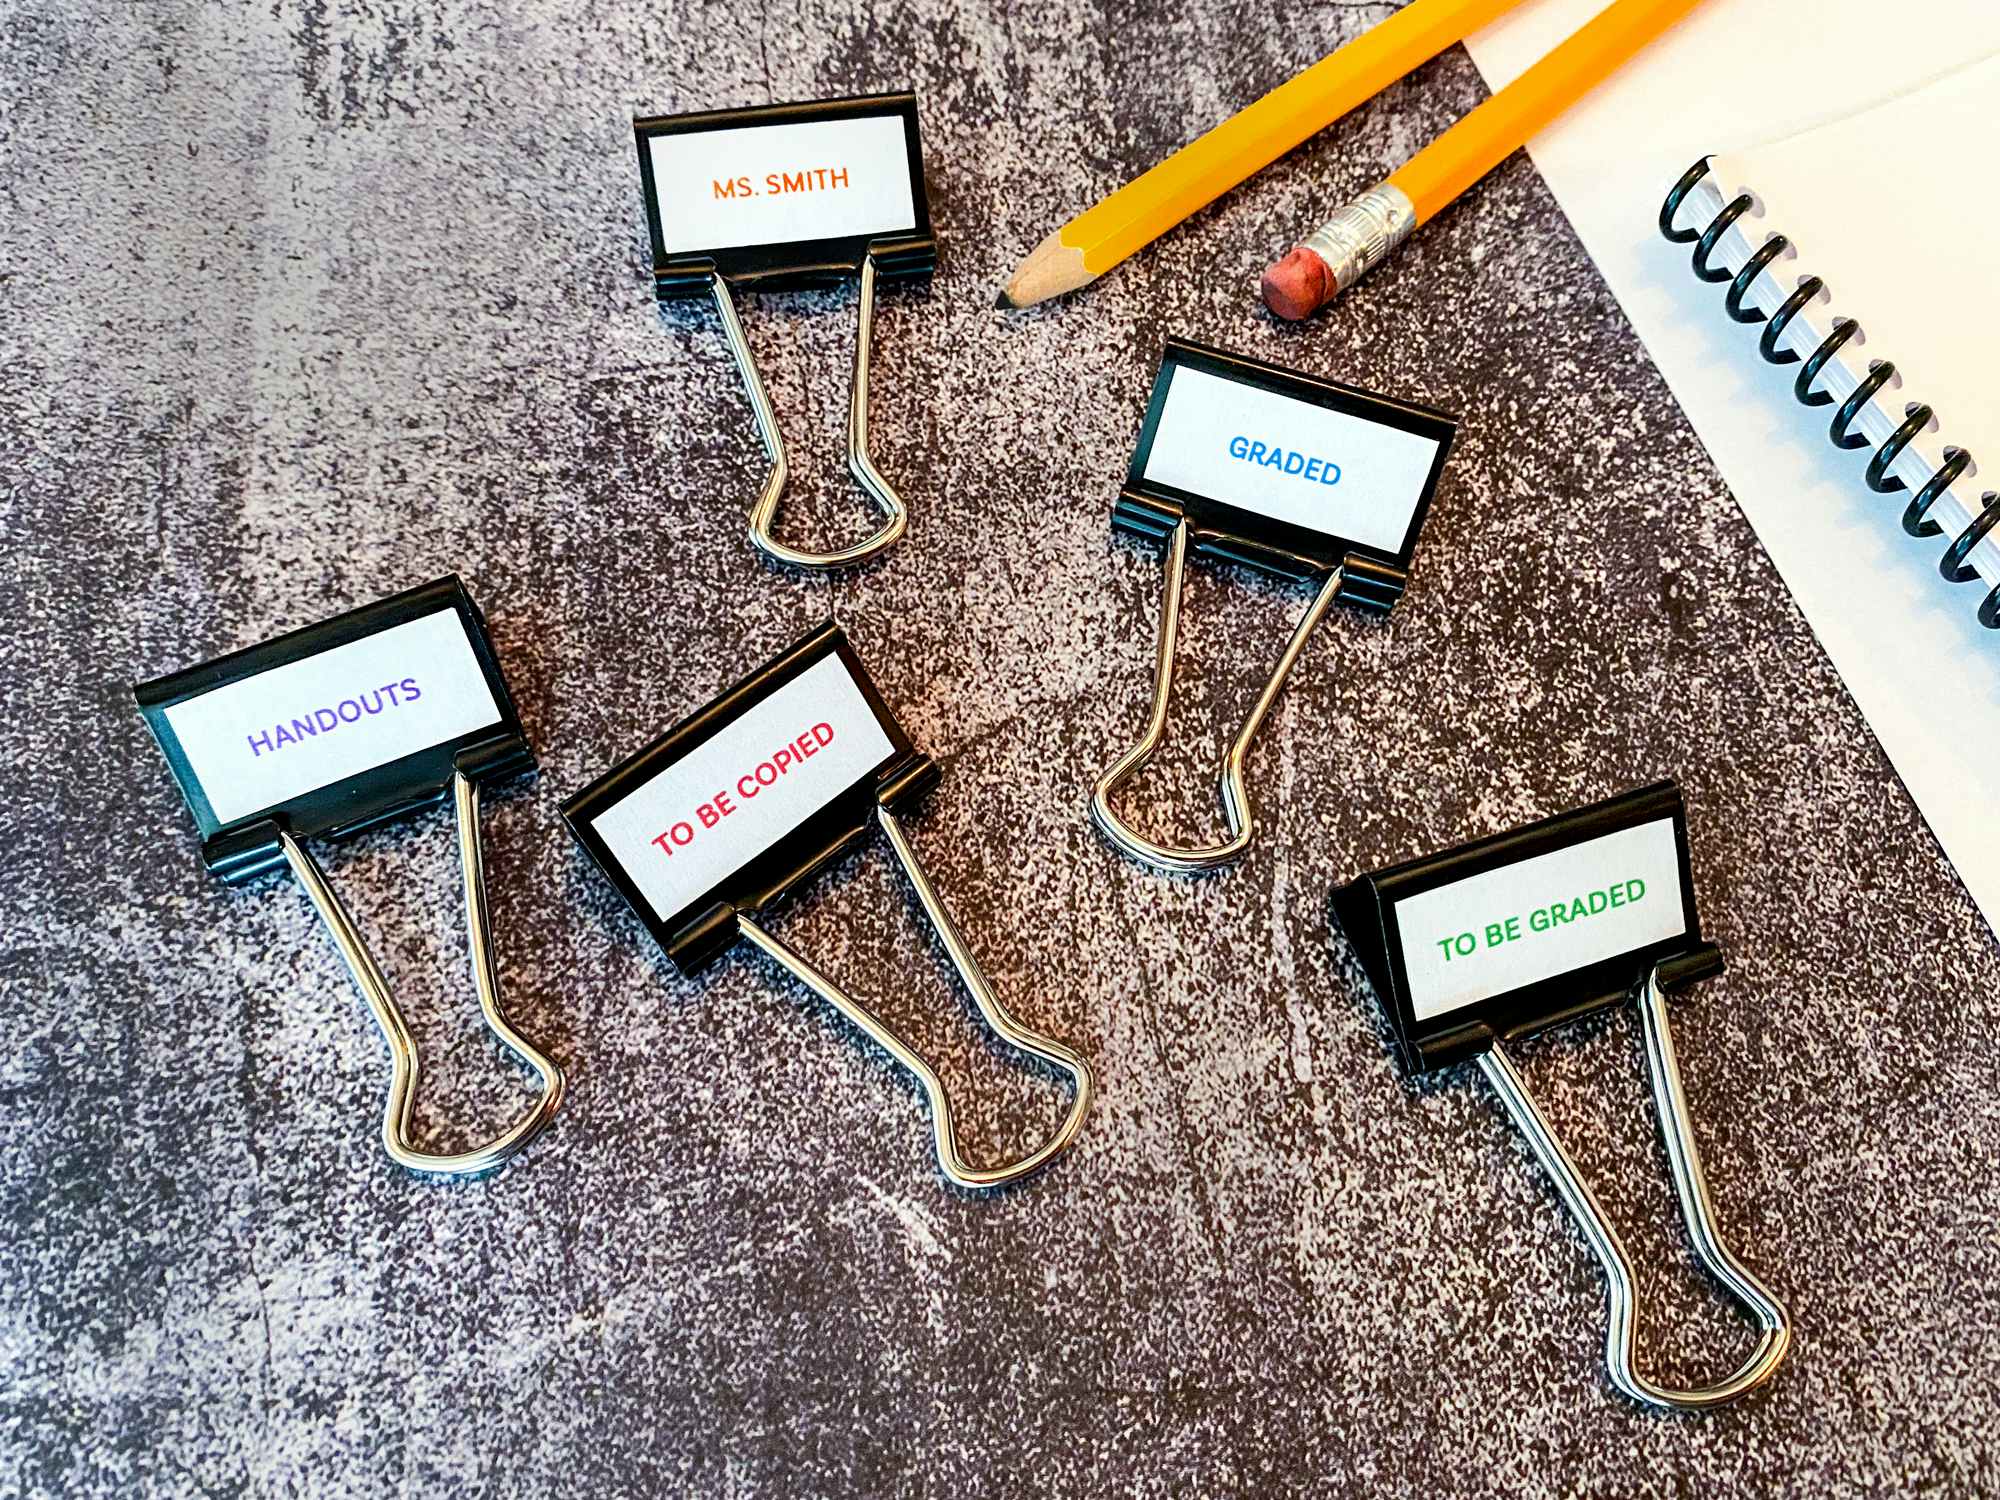 pencils and labeled binder clips for schoolwork organization